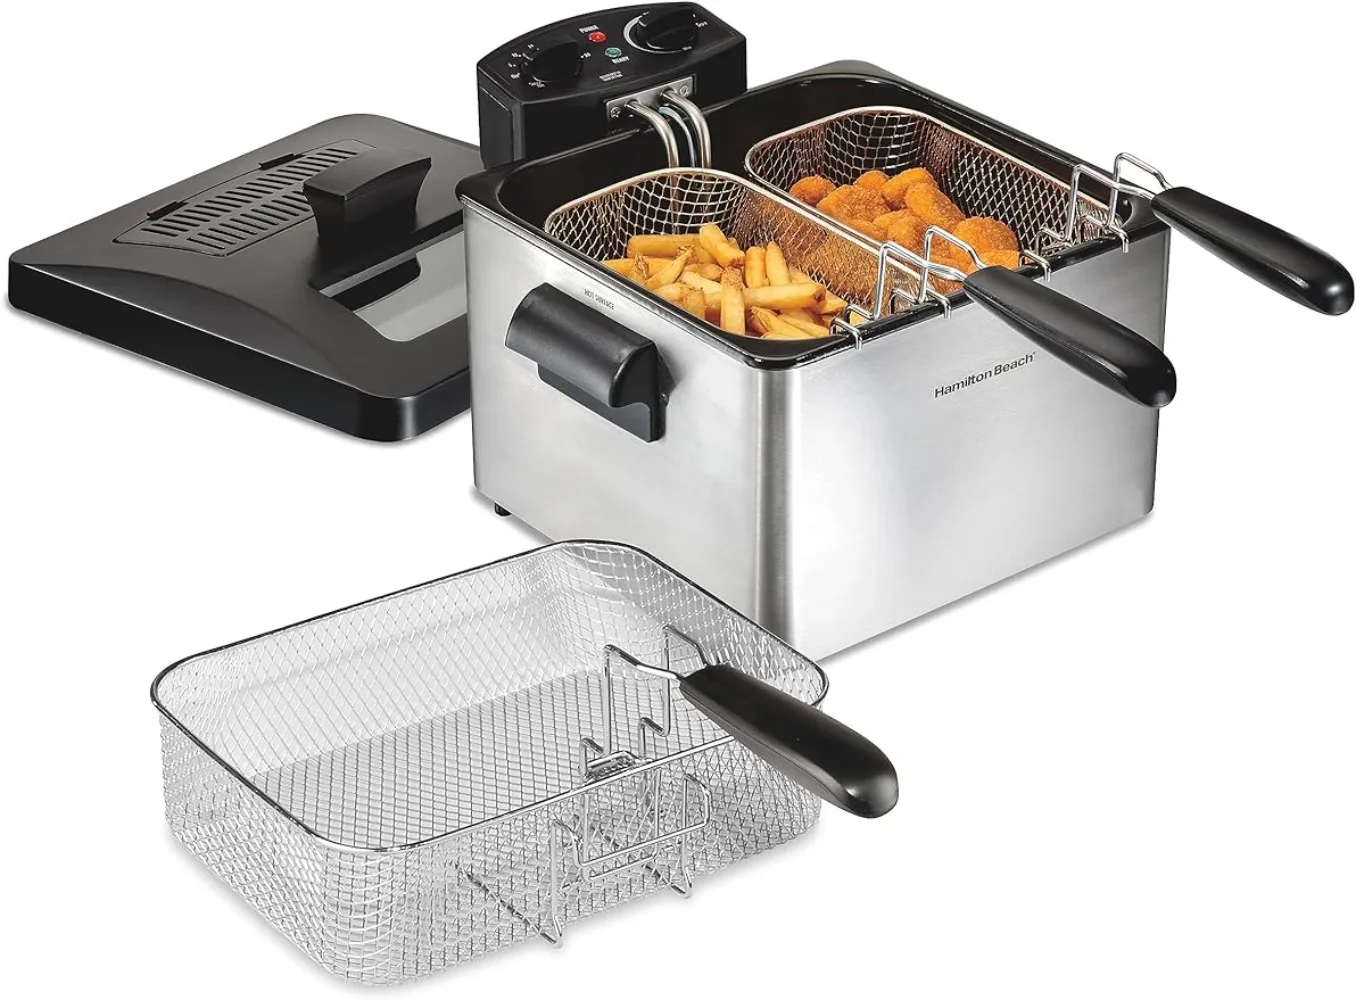 

Triple Basket Electric Deep Fryer, 4.7 Quarts / 19 Cups Oil Capacity, Lid with View Window, Professional Style, 1800 Watts